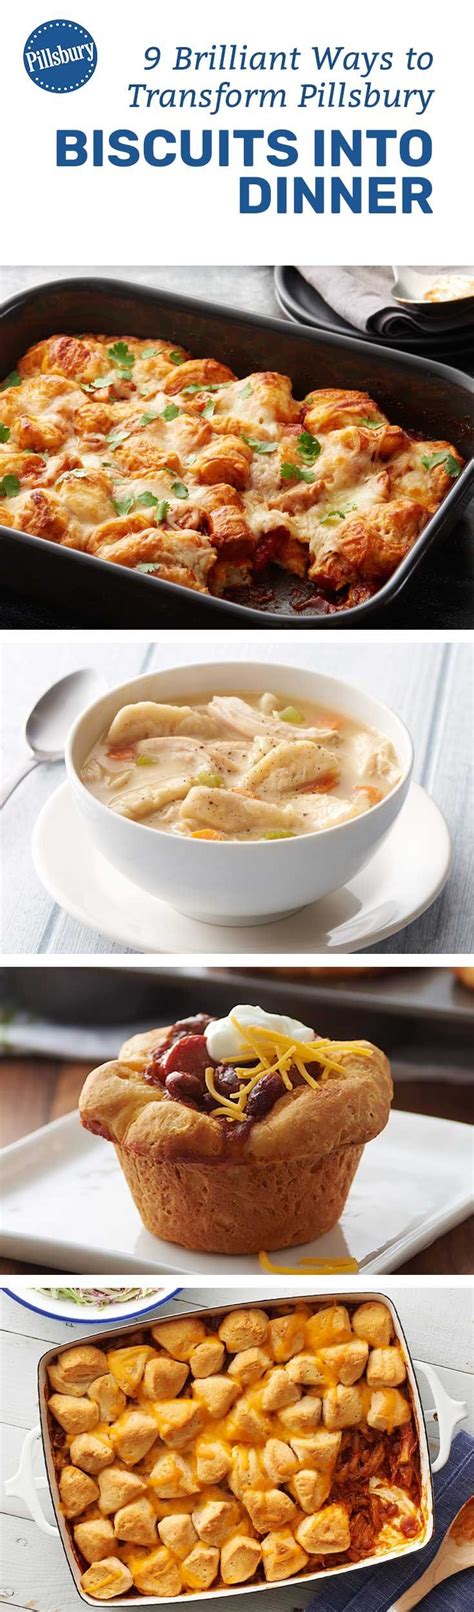 These 55 easy dinner recipes that require minimal effort. 9 Ways to Transform Pillsbury Biscuits into Dinner ...